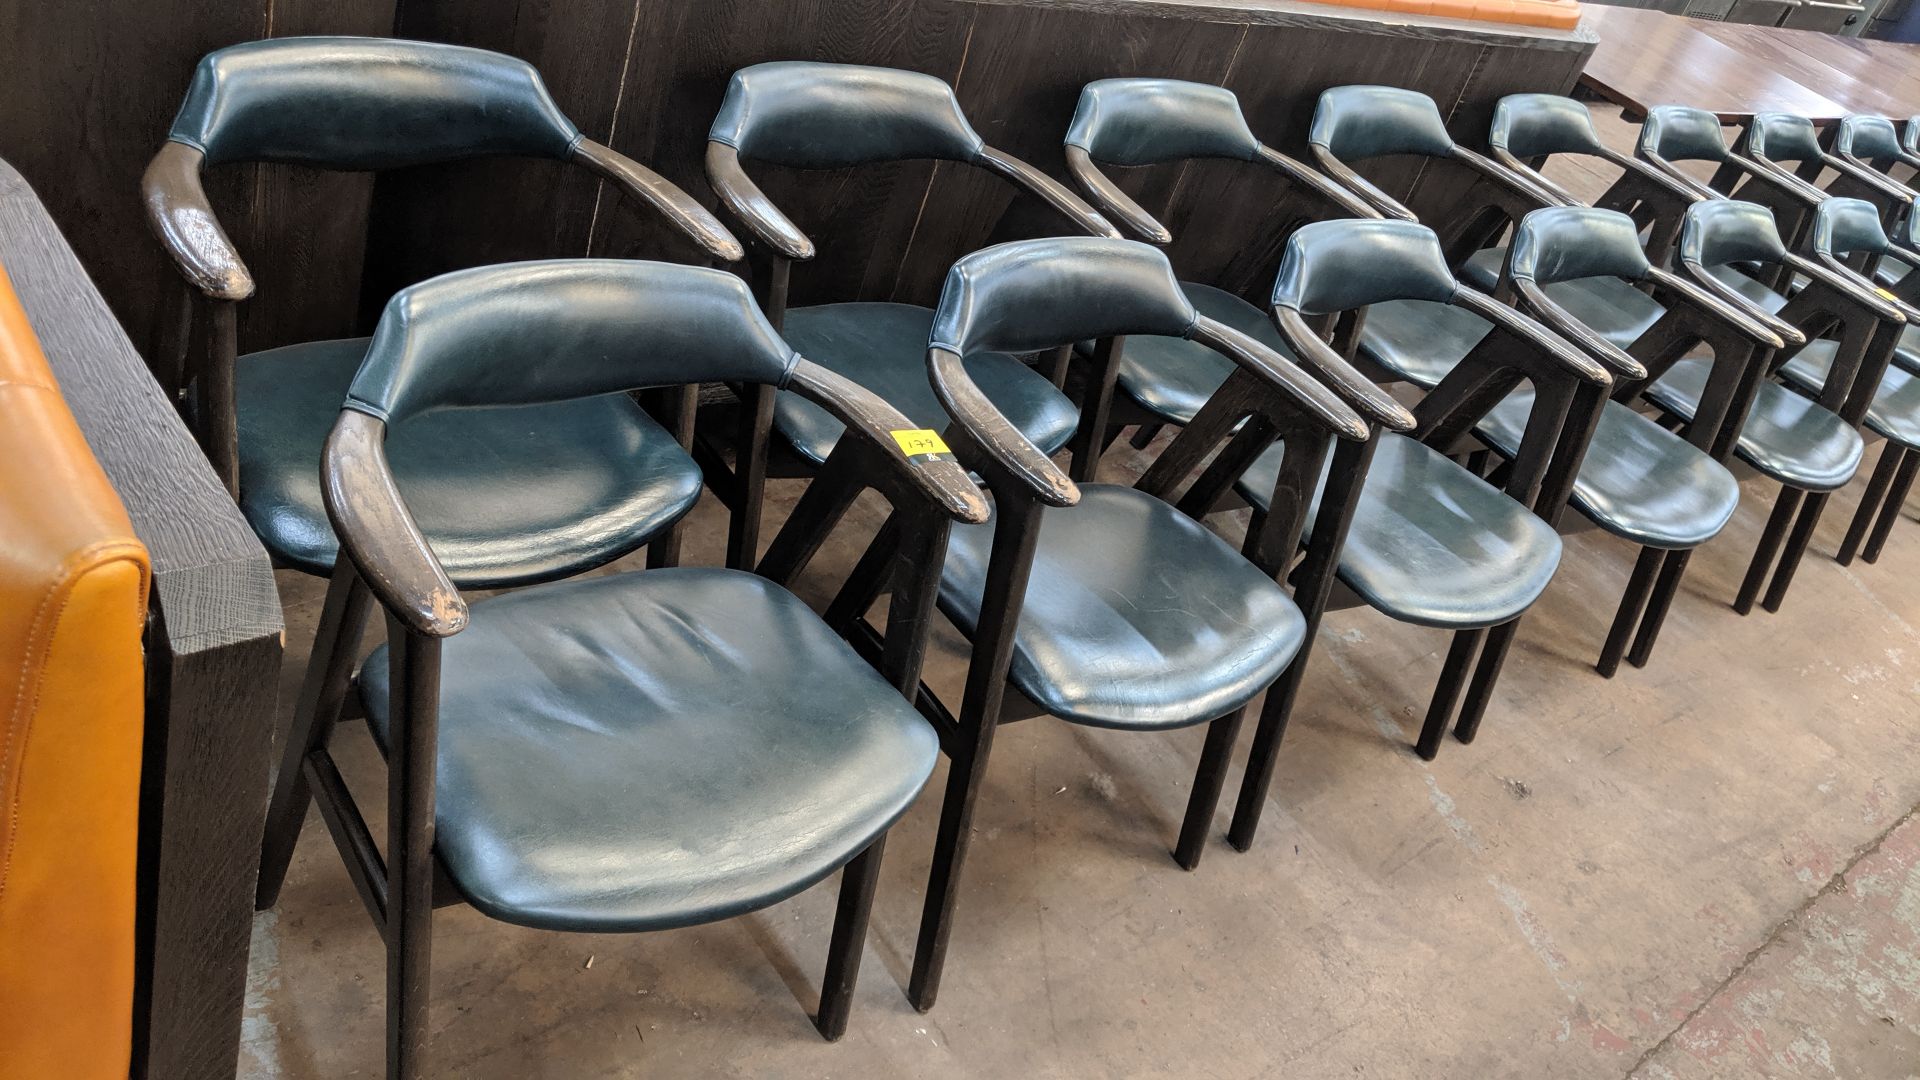 10 off upholstered wooden dining chairs with arms in a dark teal leather/leather type covering. NB - Image 2 of 4